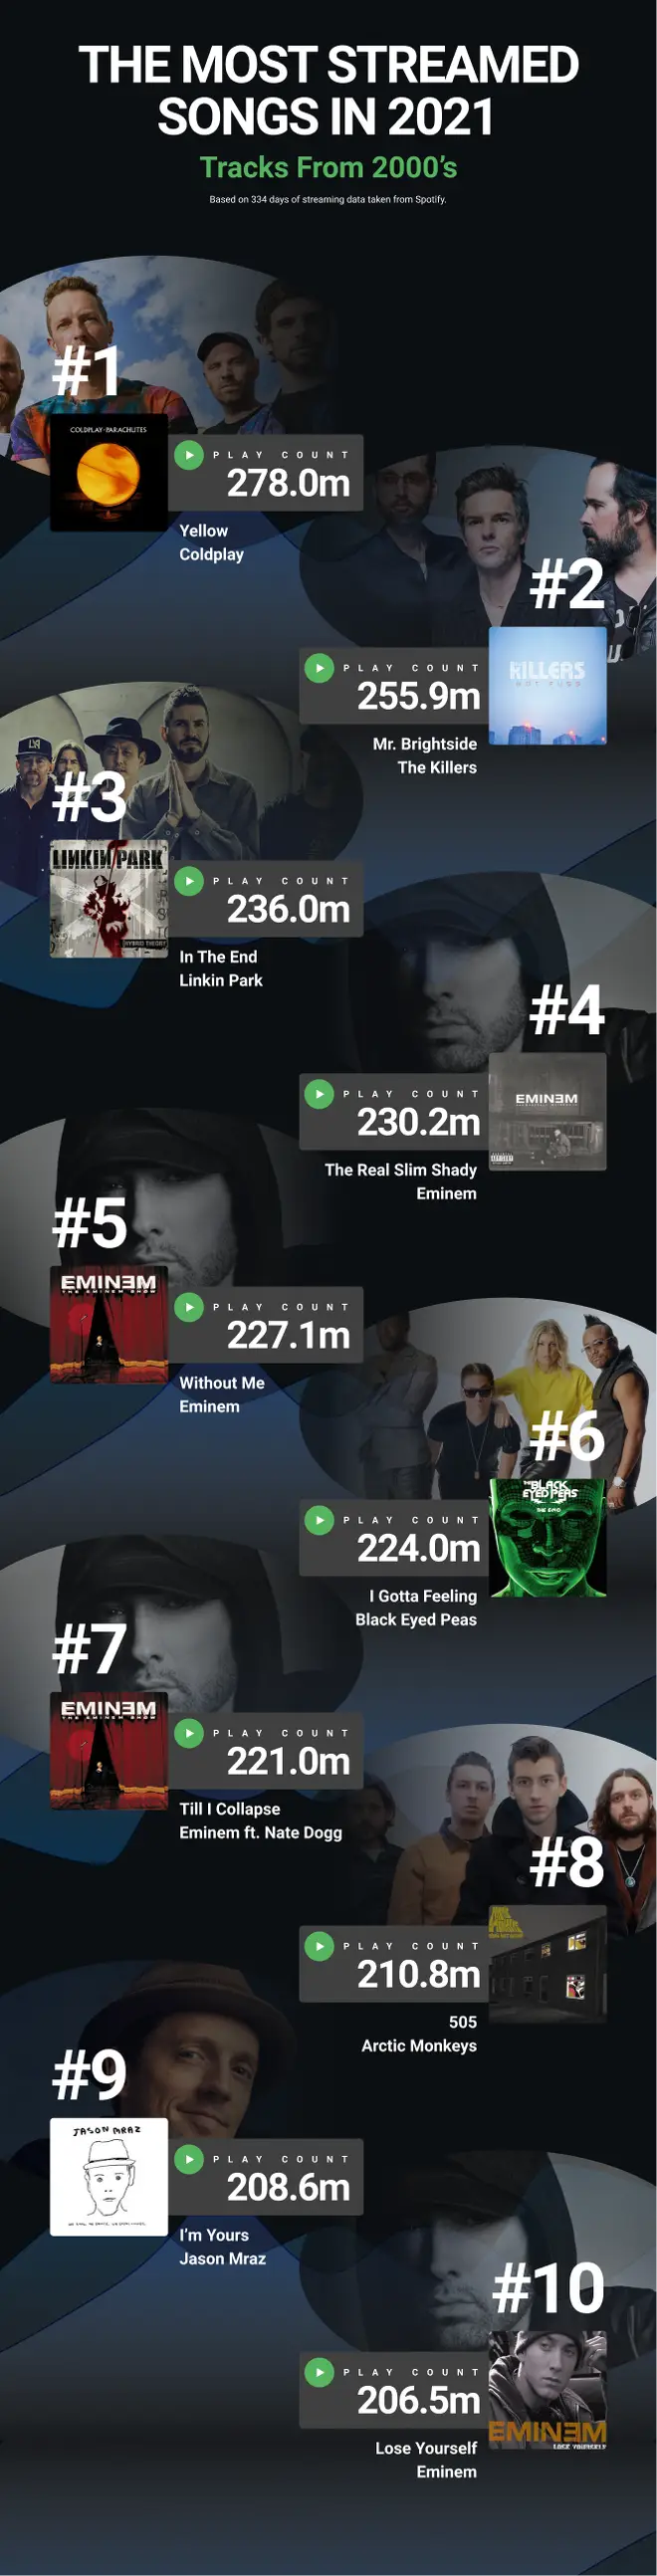 The most streamed '00s songs in 2021